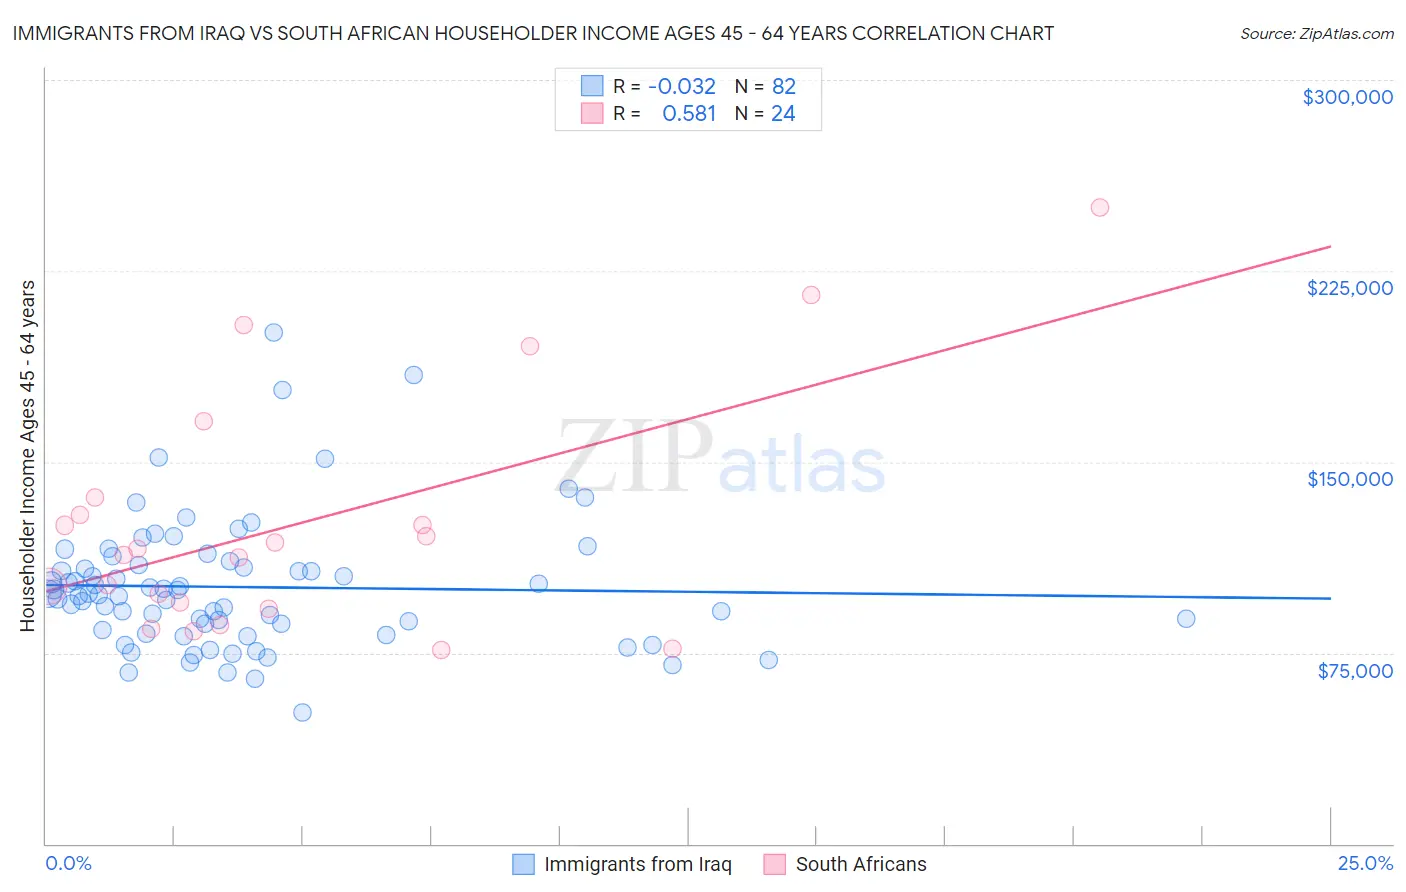 Immigrants from Iraq vs South African Householder Income Ages 45 - 64 years